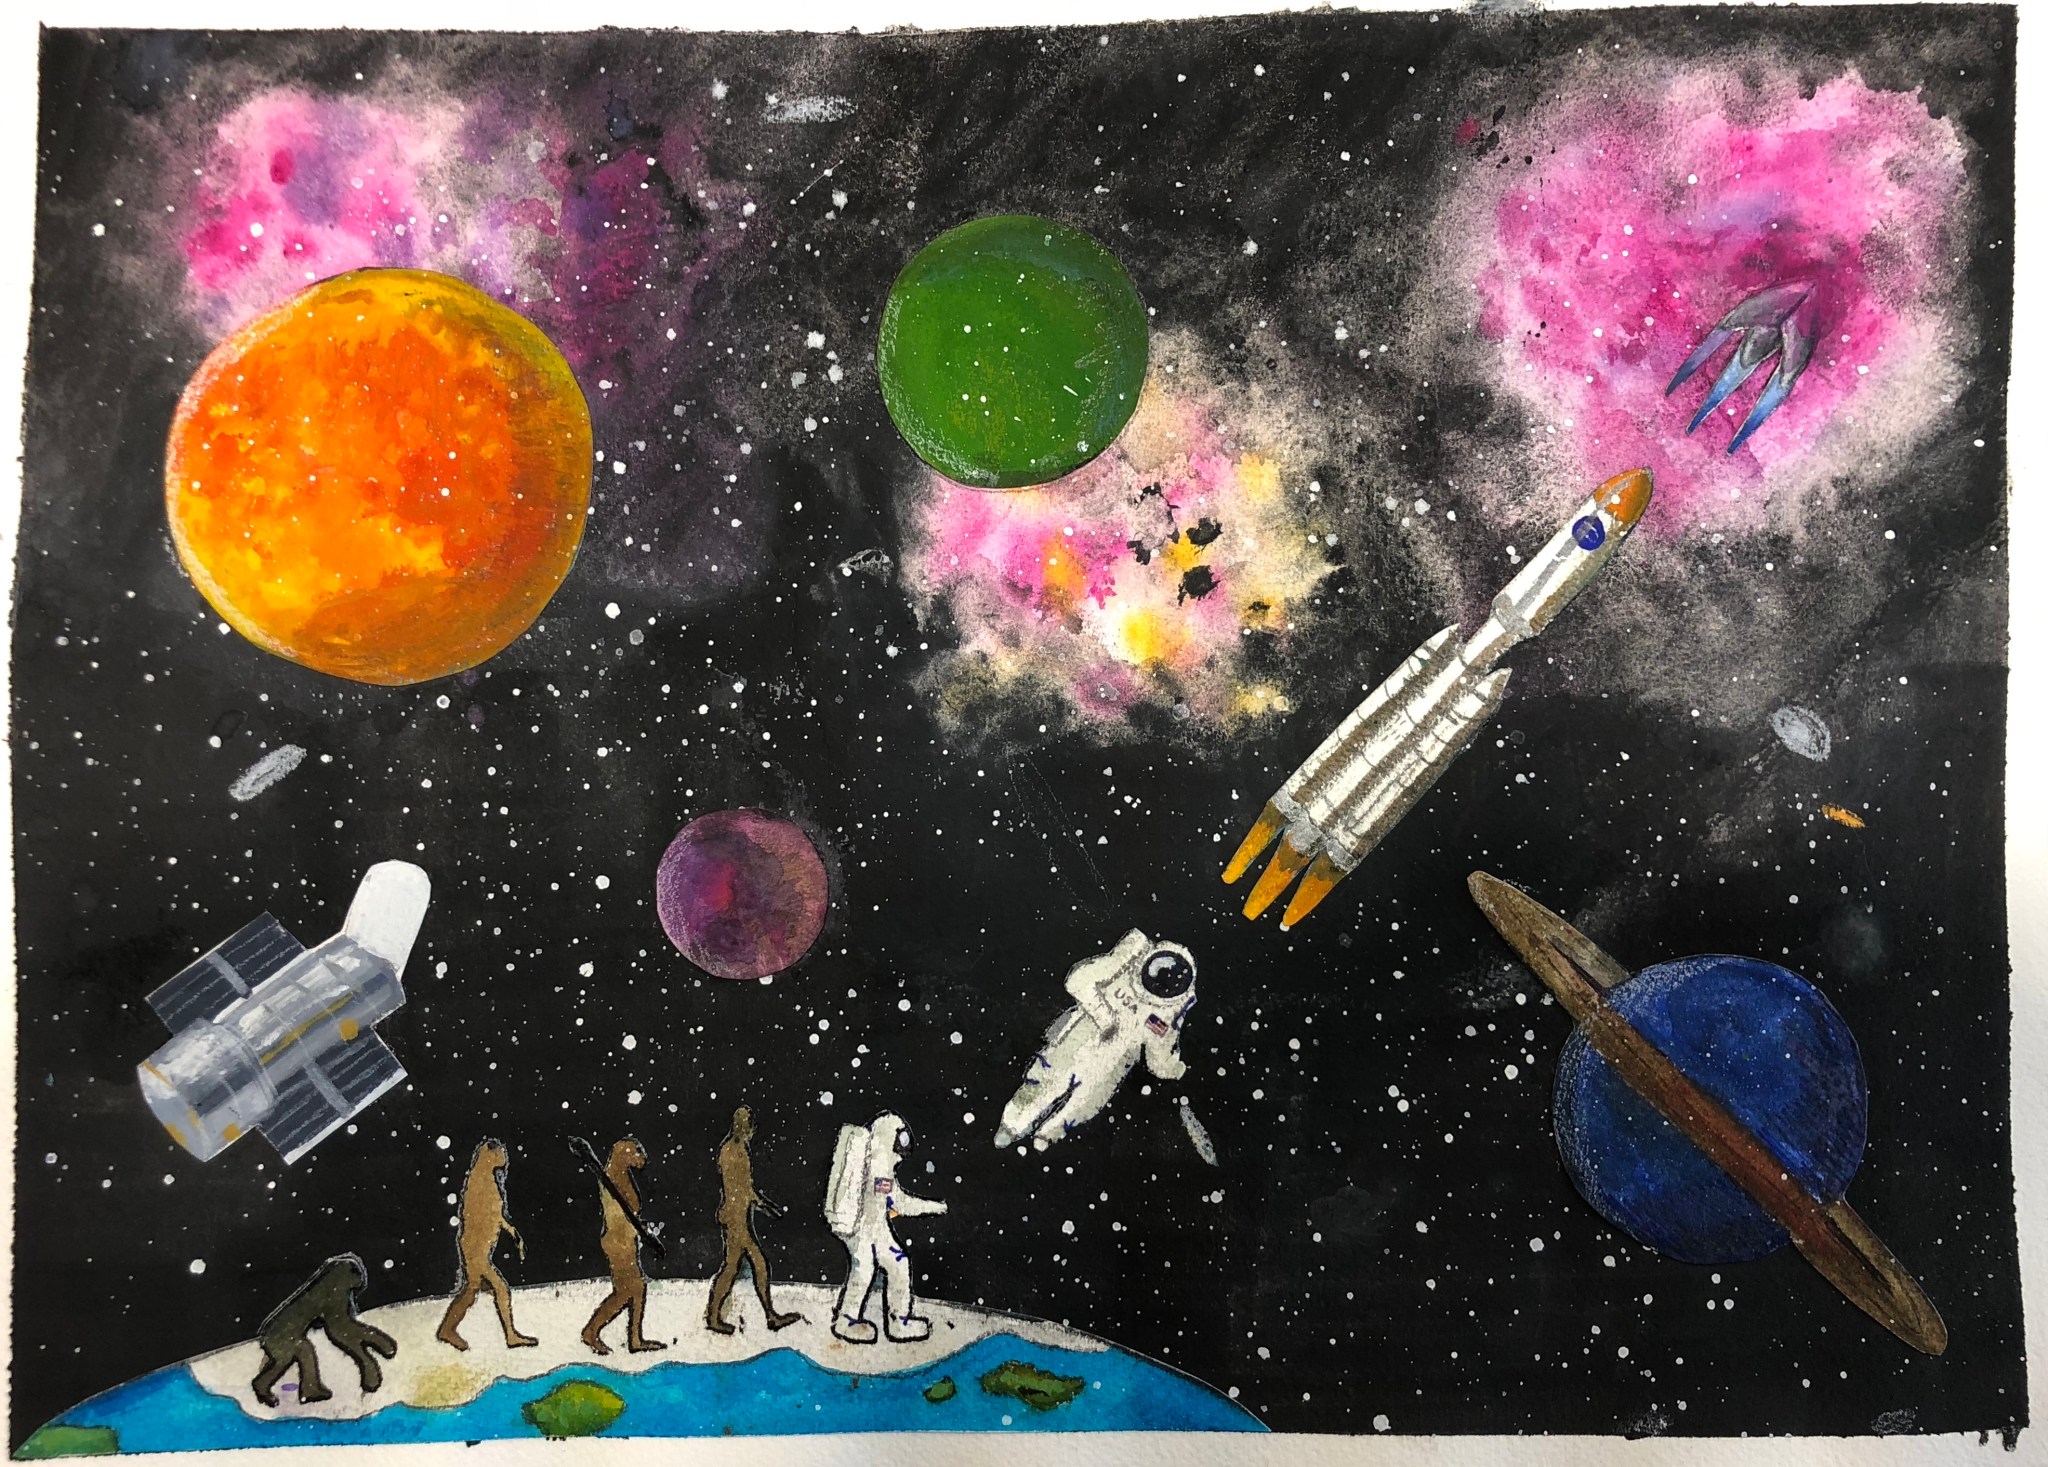 The artwork for second-place overall winner was Viva Rathod, a fourth-grade student from Skillman, New Jersey.